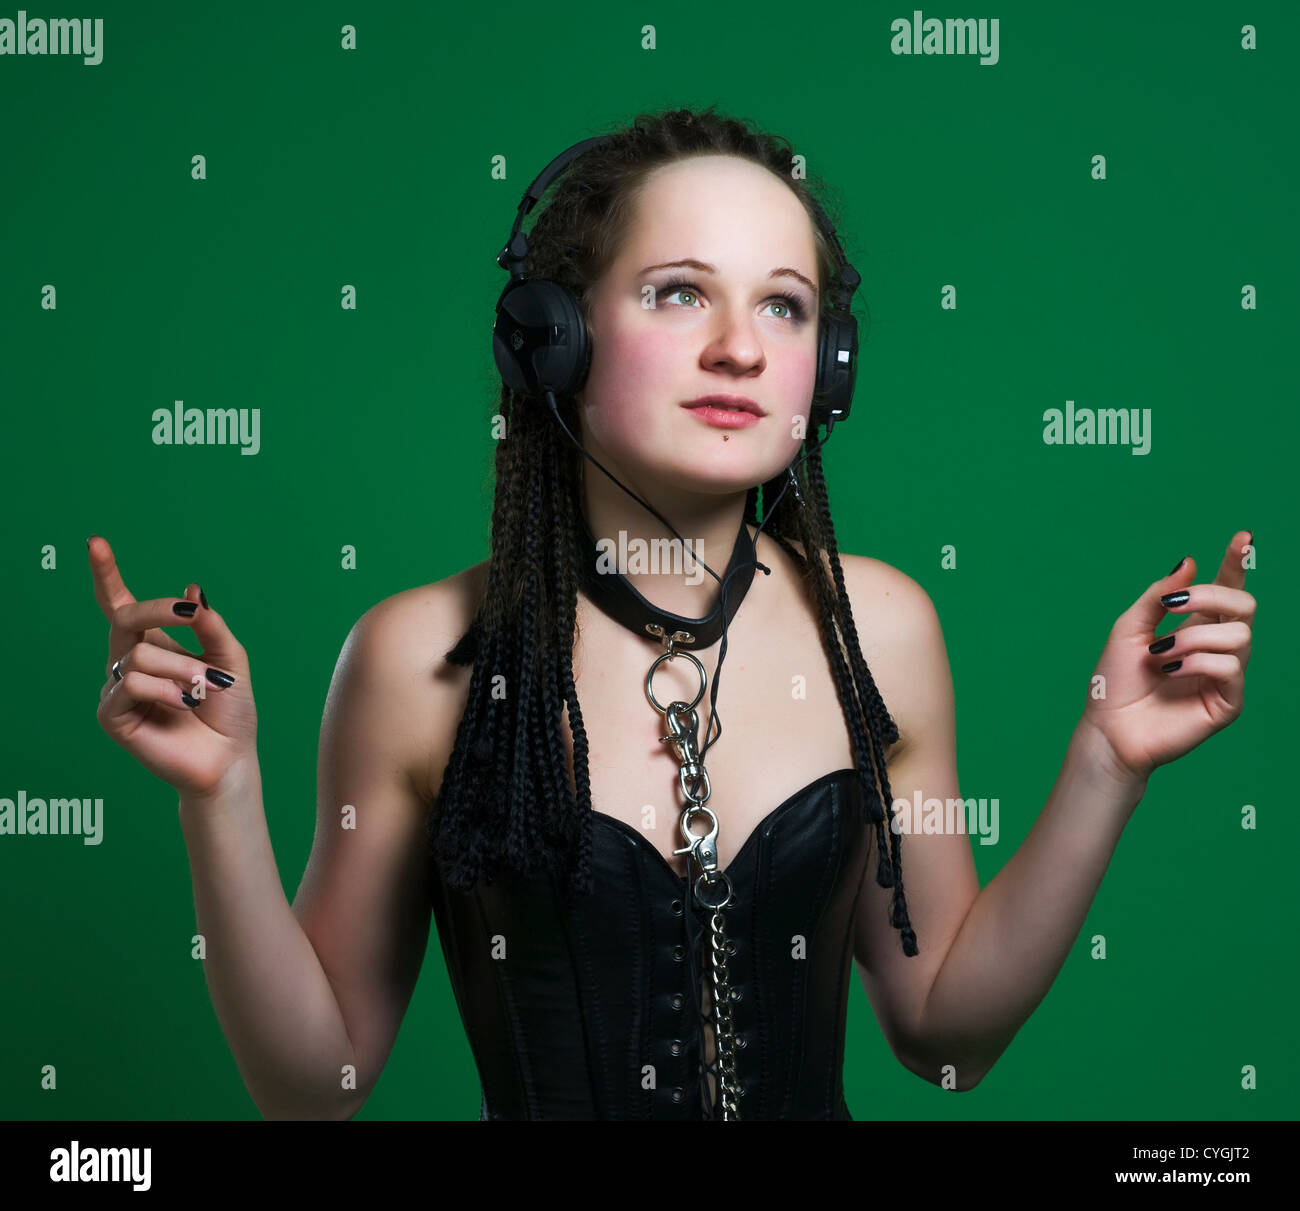 Sexy gothic woman with dreads wearing BDSM outfit listening to the music on  green background Stock Photo - Alamy